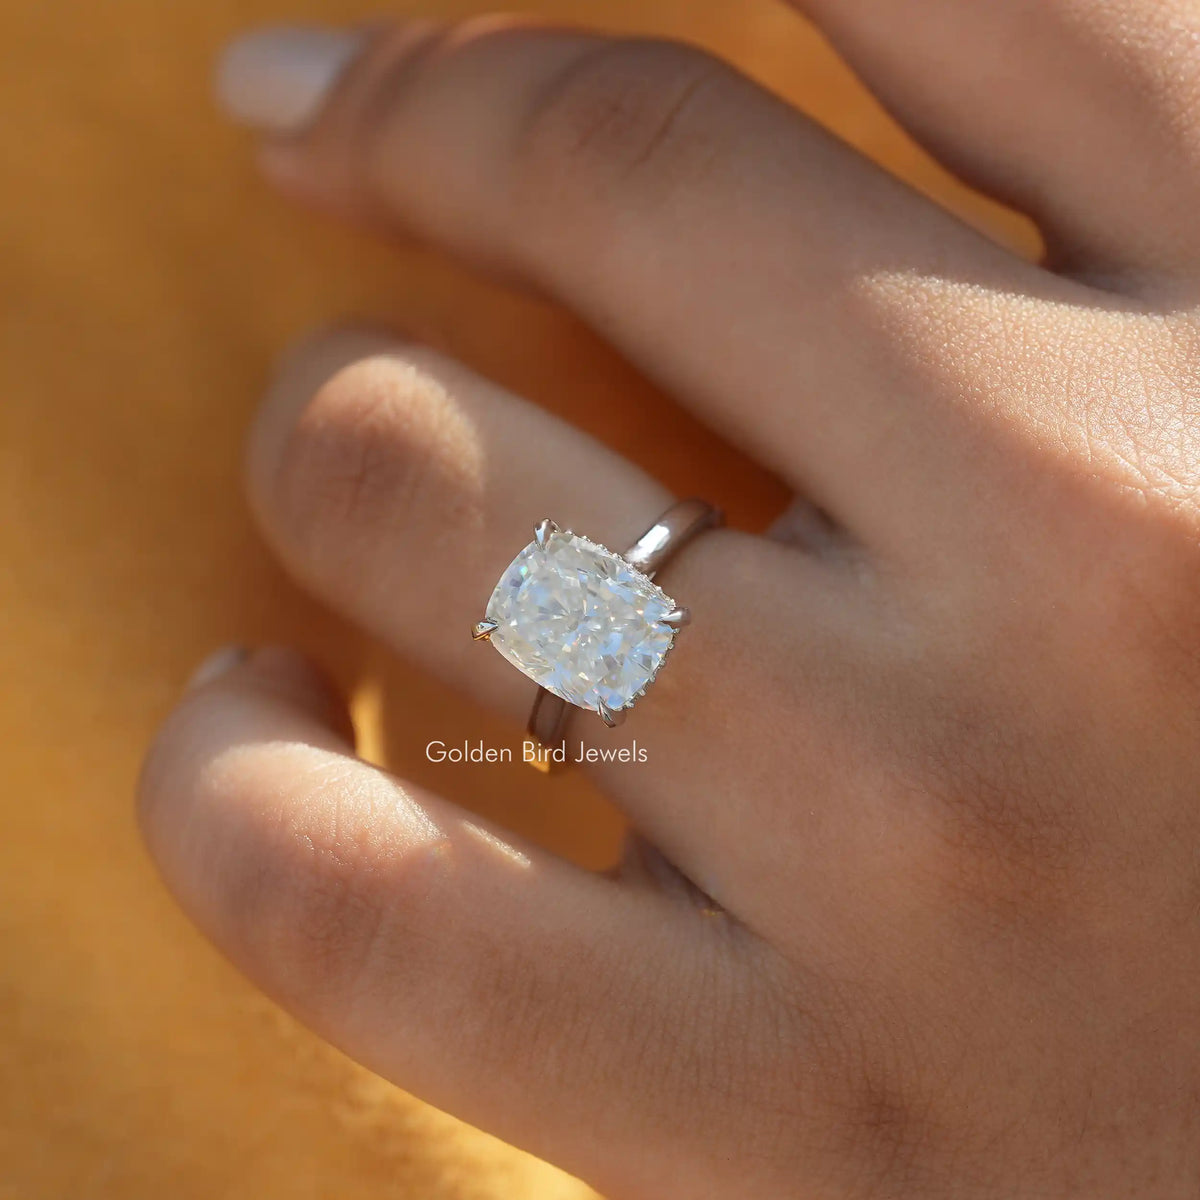 [In Finger a 1.00 to 5.00 CT Elongated Cushion Cut Moissanite Ring]-[Golden Bird Jewels]